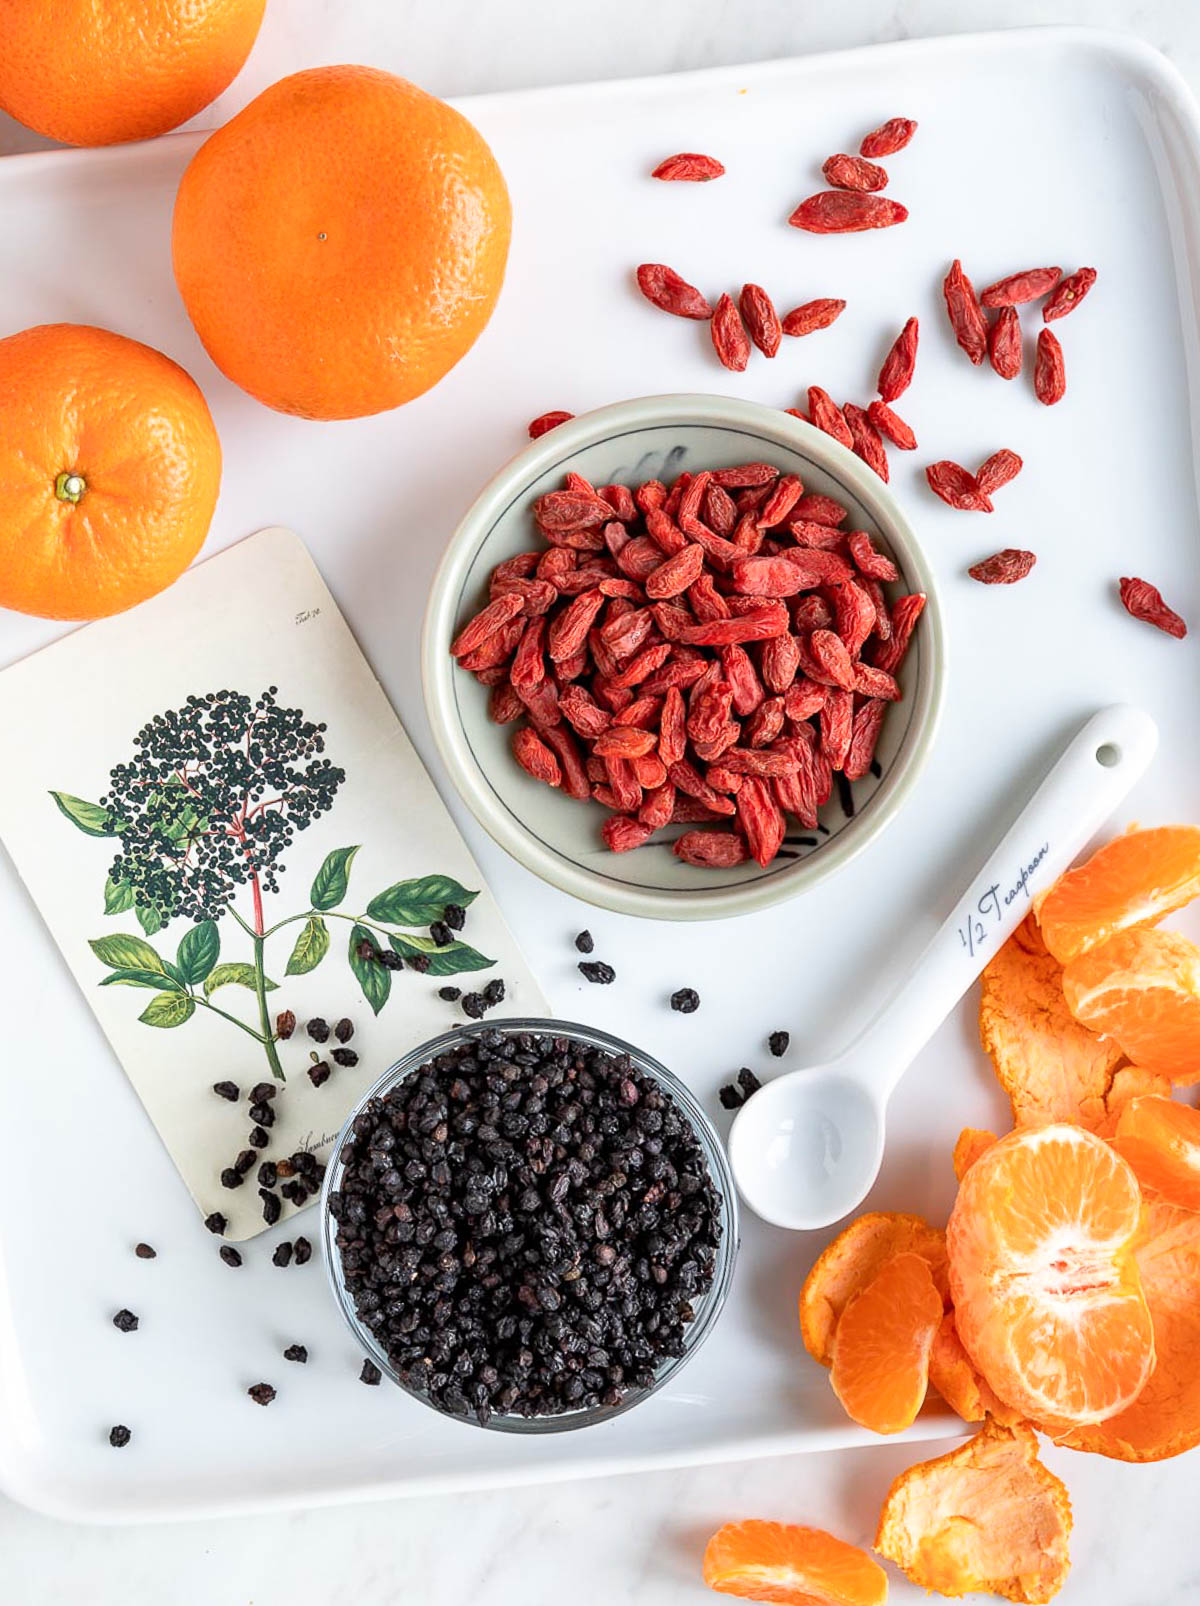 superfoods that help boost immunity including goji berries, oranges and elderberry in white bowls.